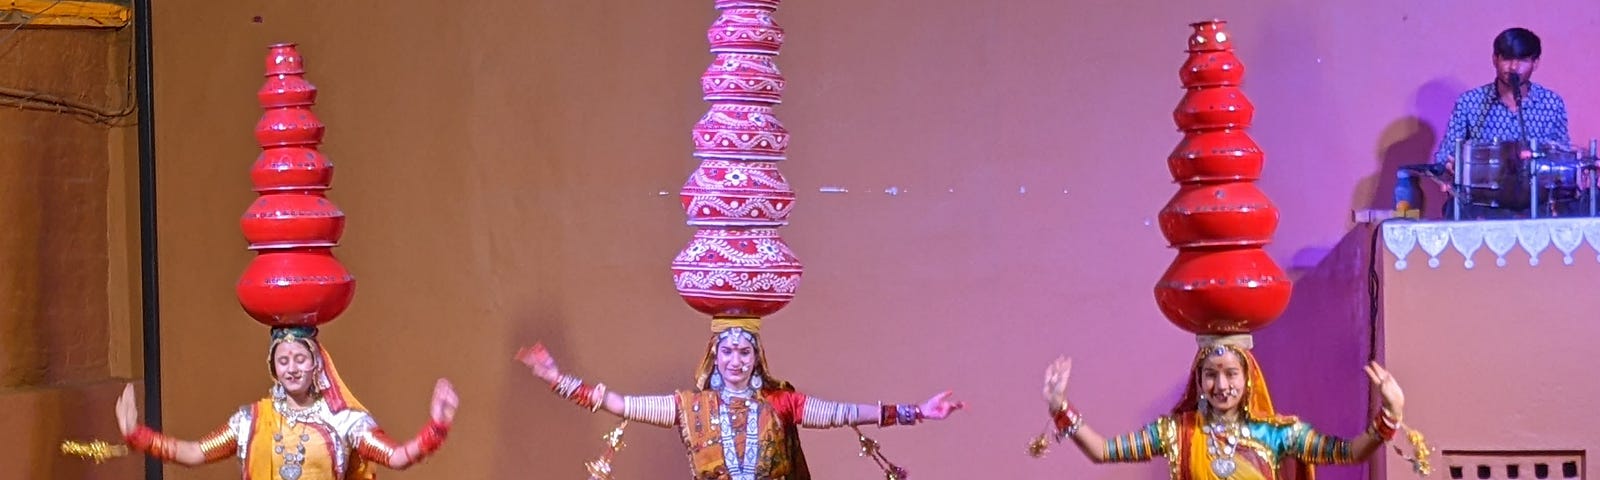 Photo of 3 women dancing in traditional Rajasthani attire with several pots balanced on their heads